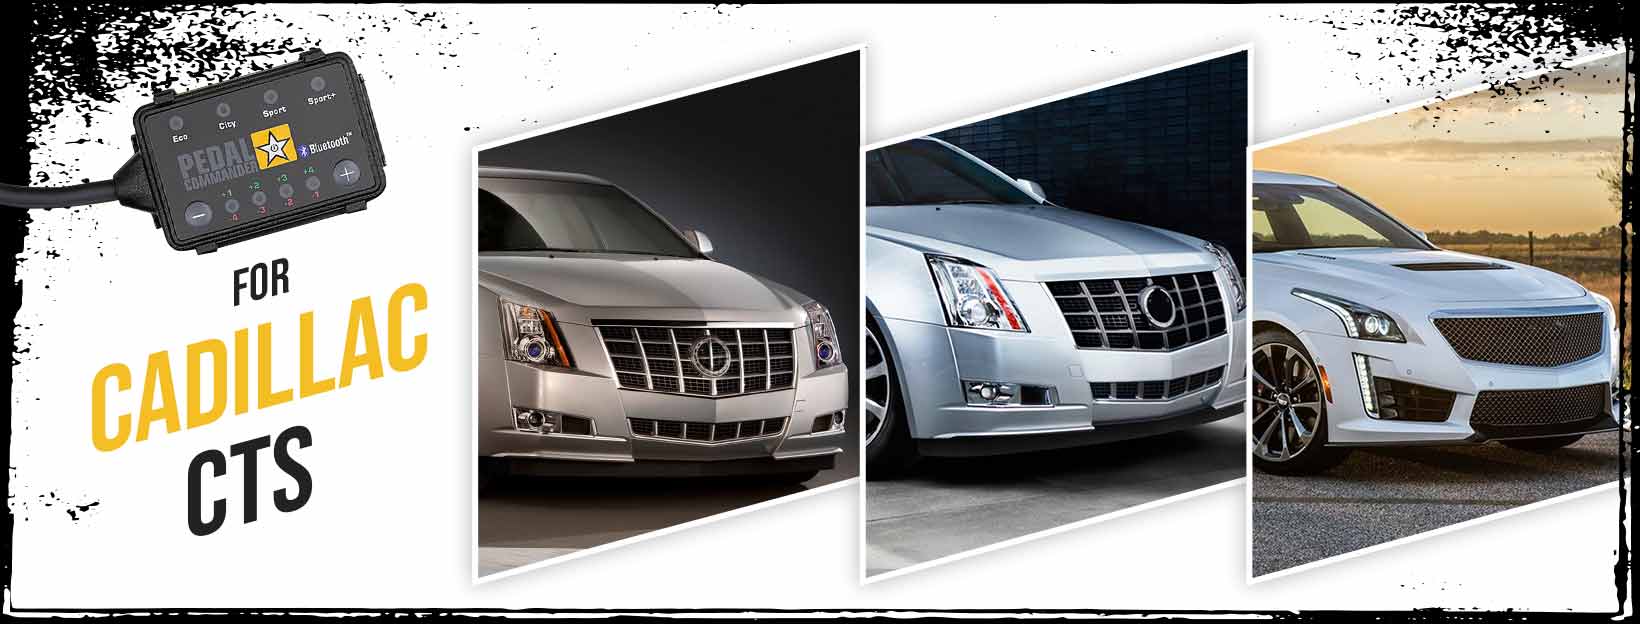 Pedal Commander for Cadillac CTS